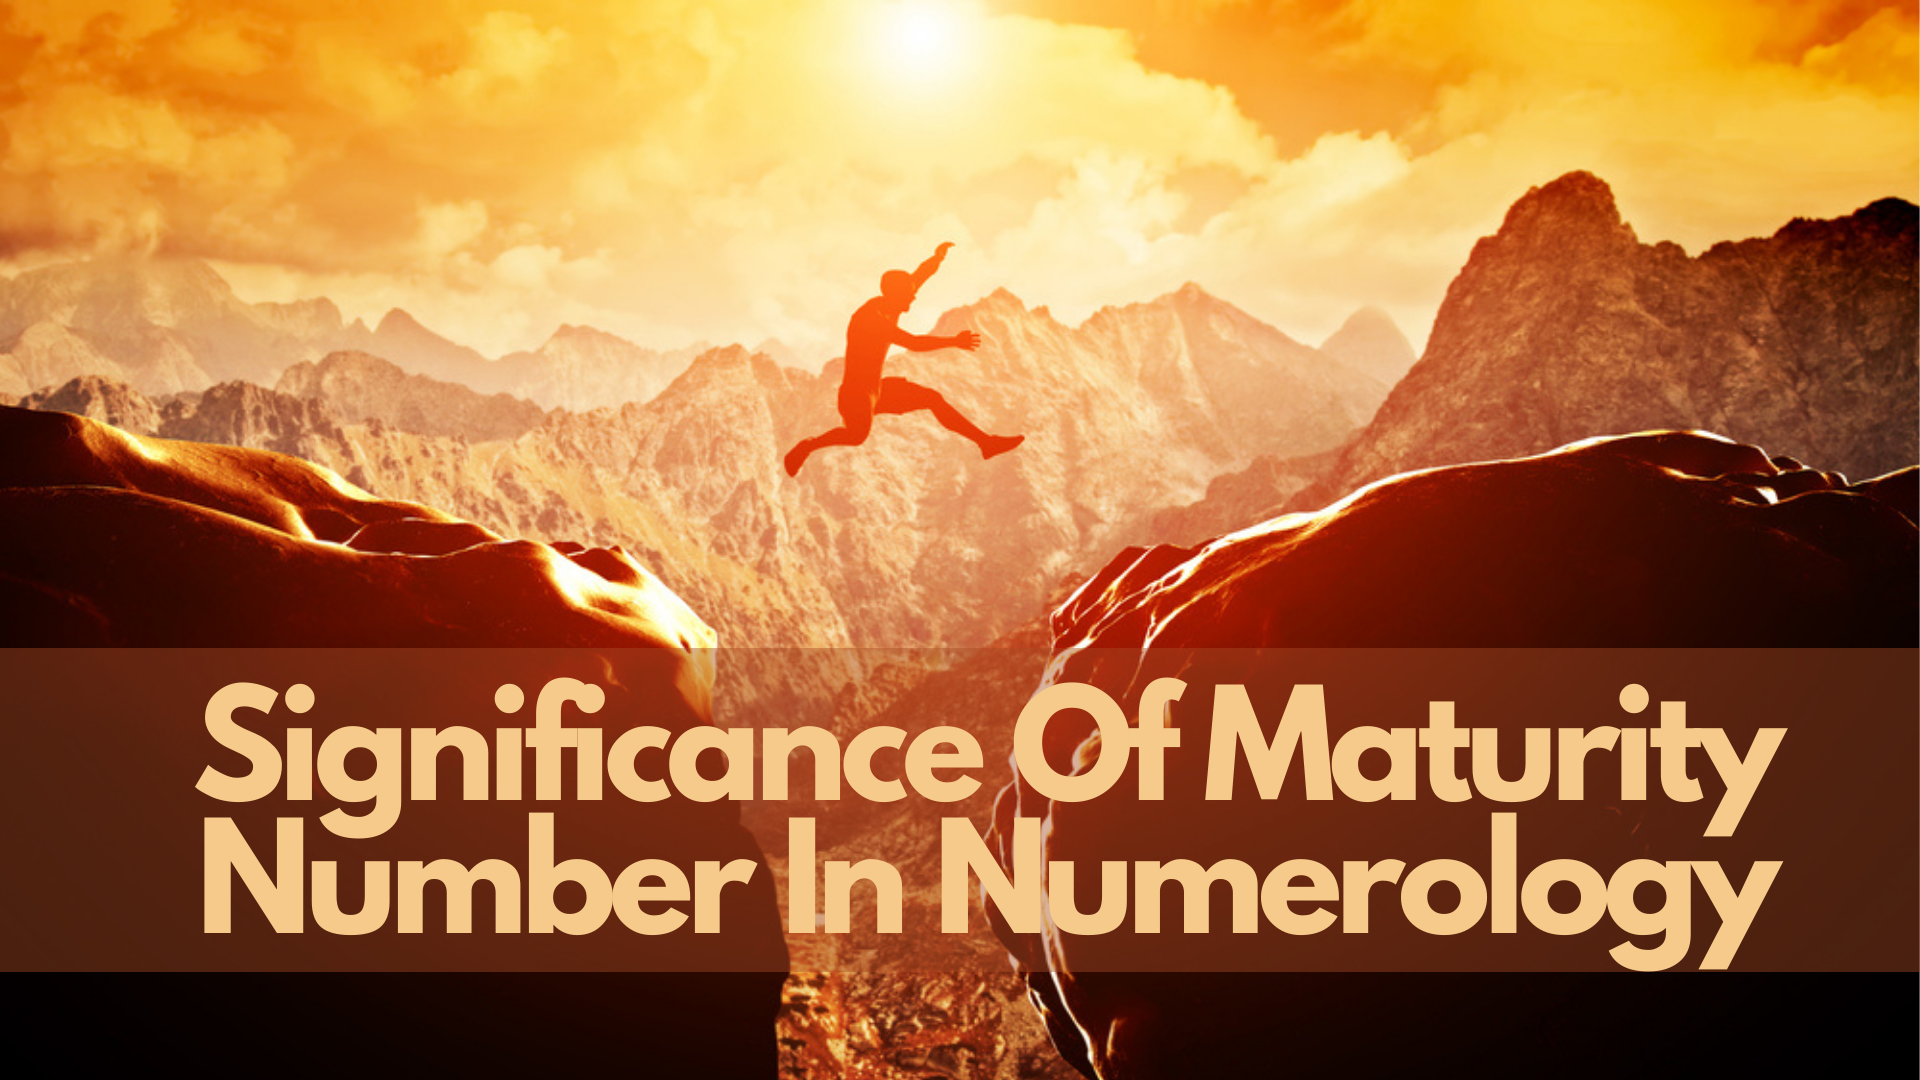 A person leaping from one mountain to another with words Significance Of Maturity Number In Numerology